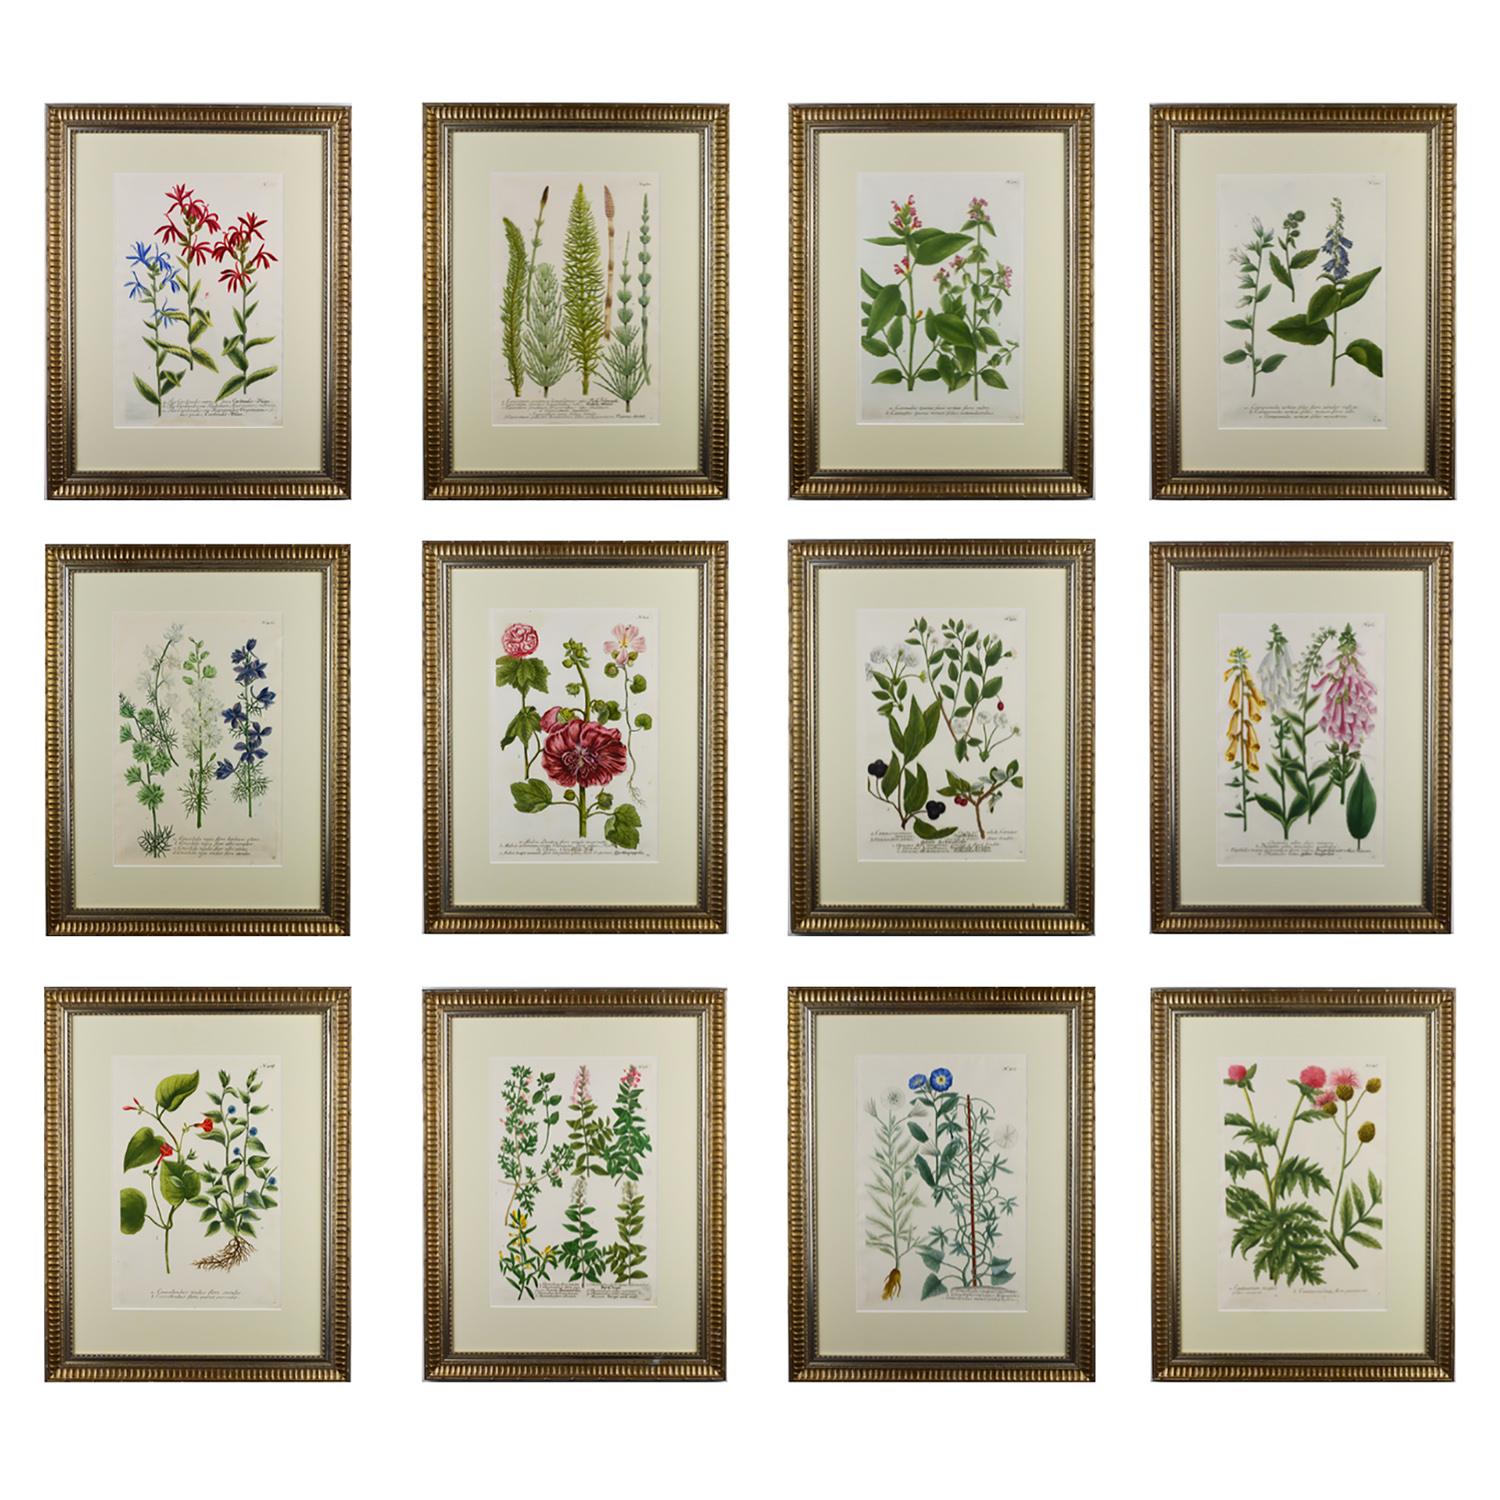 A set of 12 Botanical engravings by Johann Wilhelm Weinmann from the rare first edition of ‘Pytanthoza Iconographia’. This was a pioneering work as it made successful use of the color-printed mezzotint process retouched in transparent or opaque